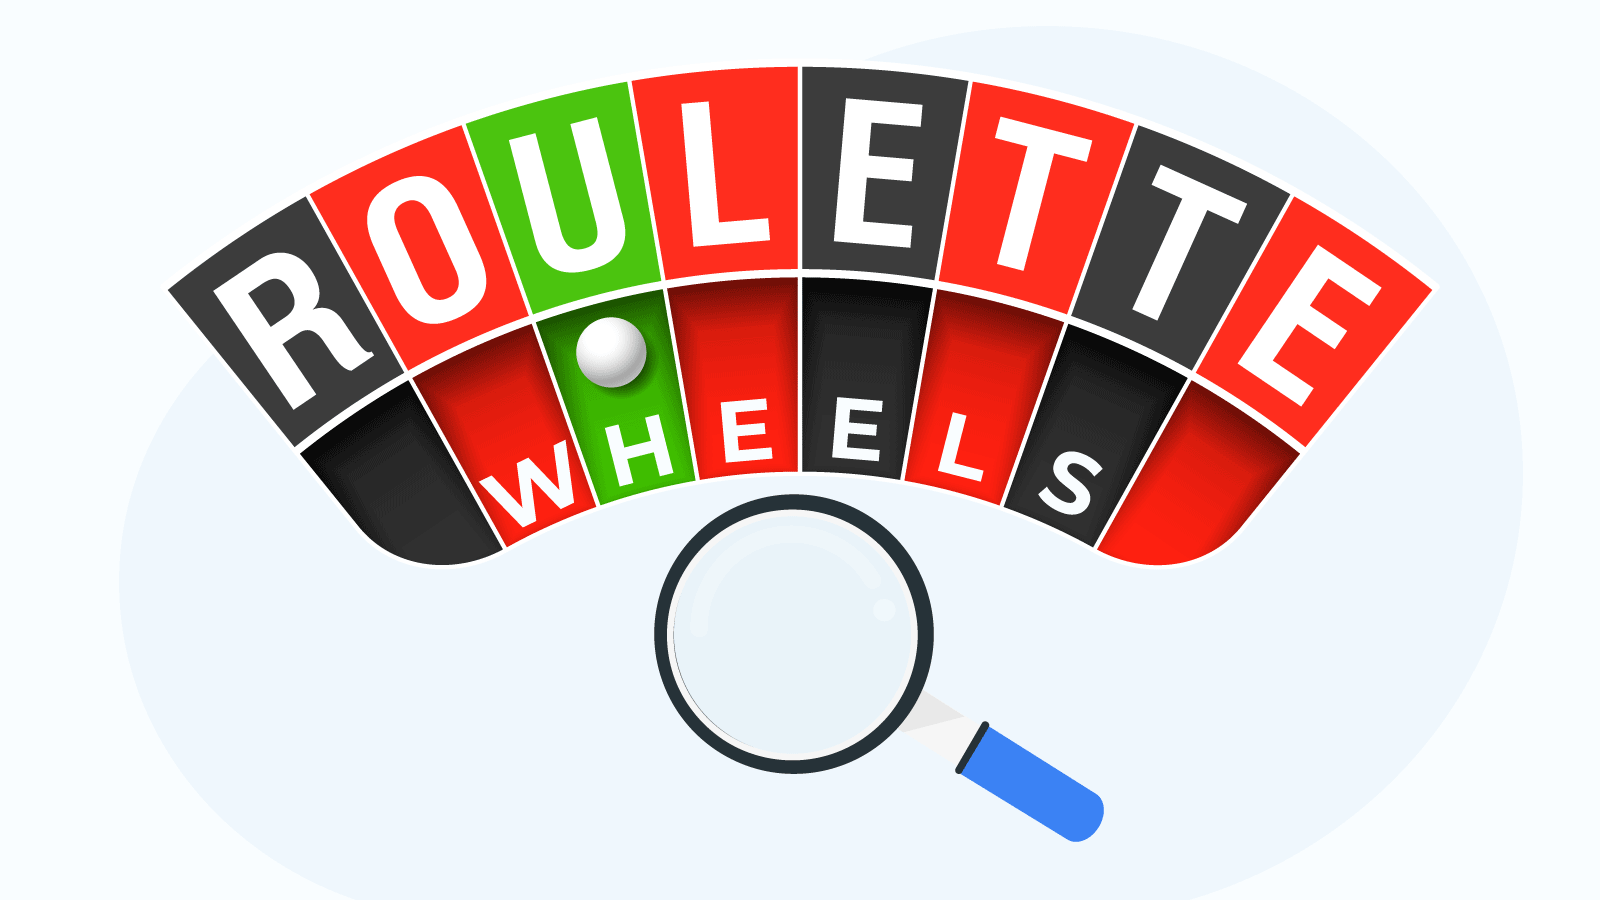 An in-depth look at the Roulette wheels